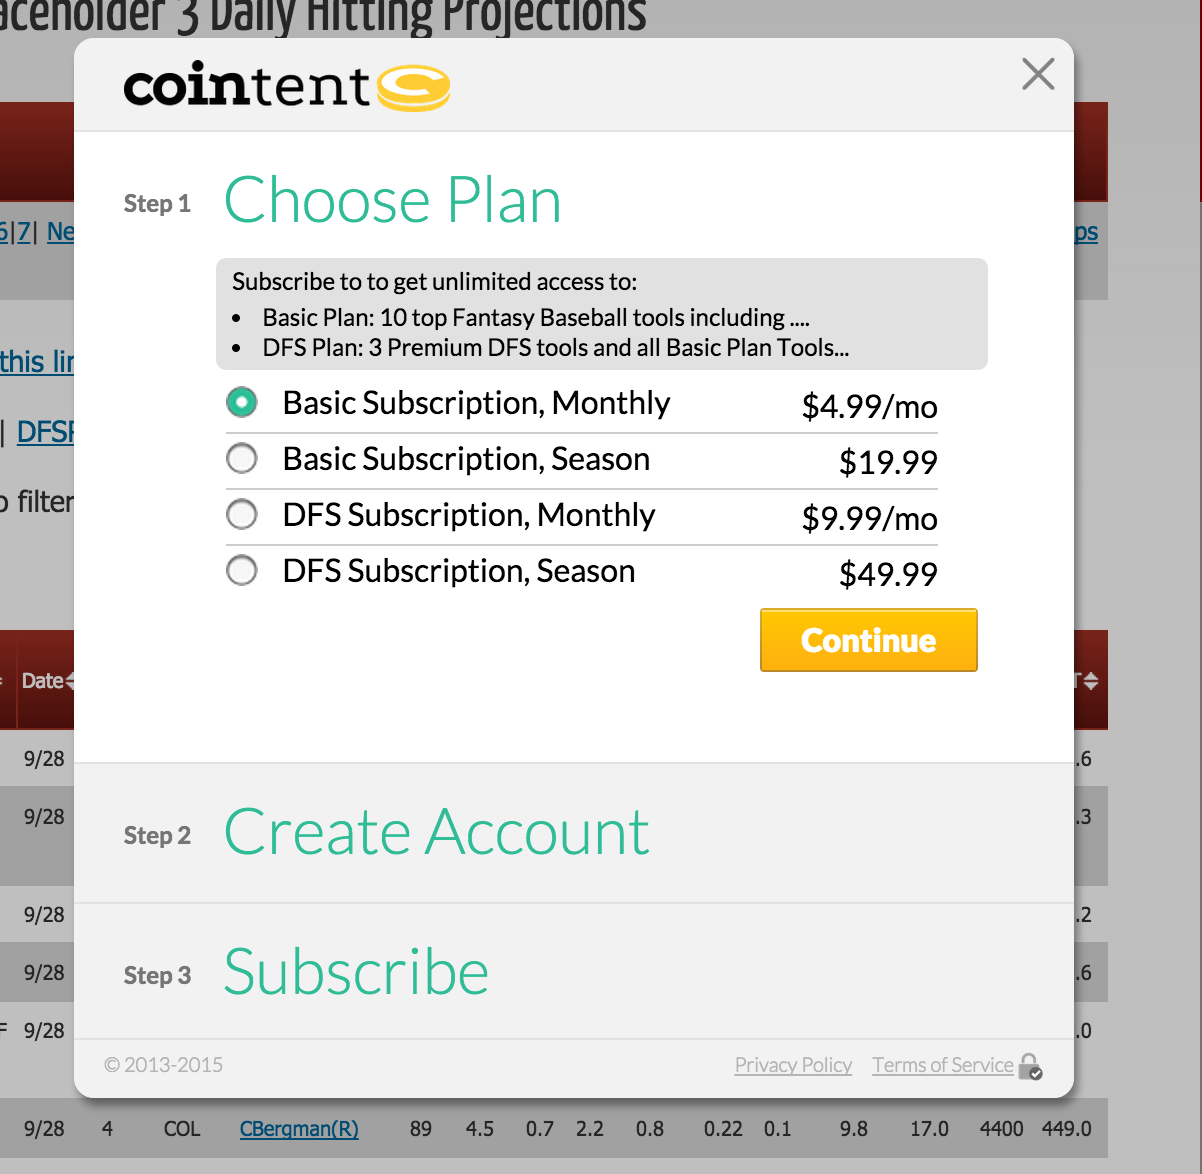 The CoinTent subscription sign-up page. This is how the user creates an account to subscribe to your website.